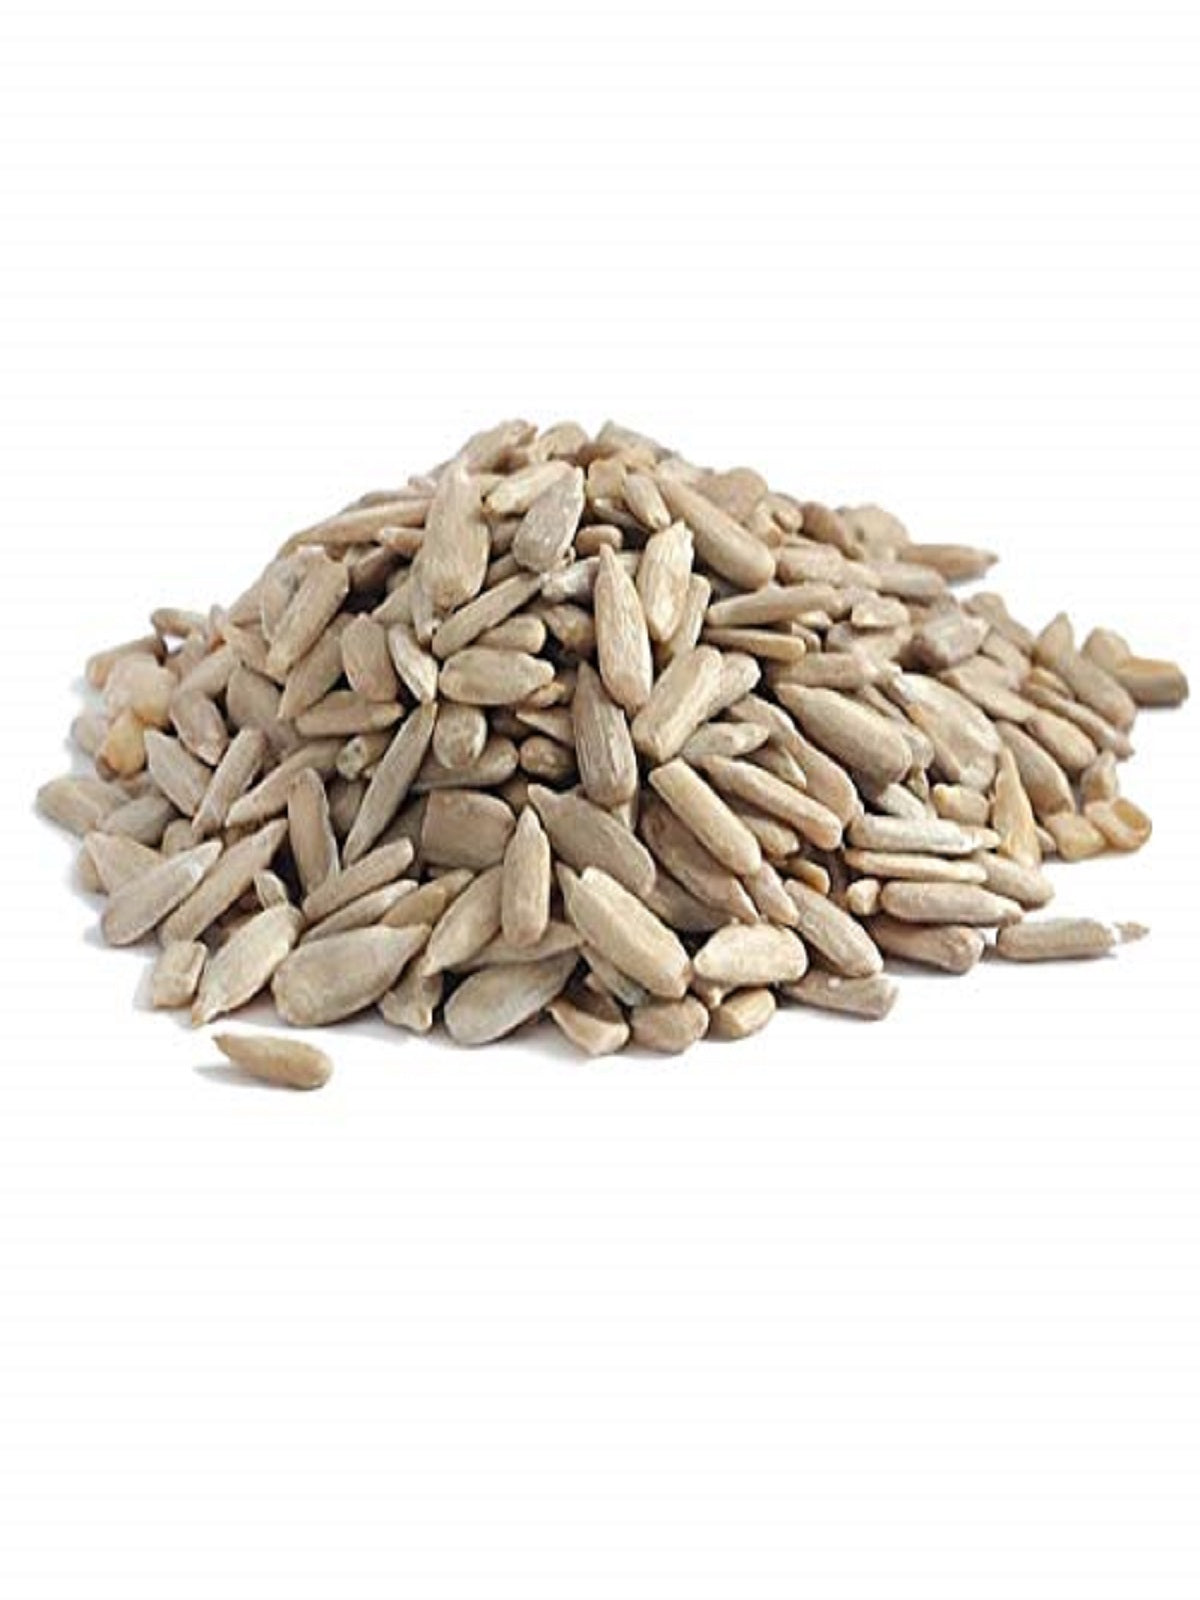 Buy the best quality sunflower seeds online at Farmonics